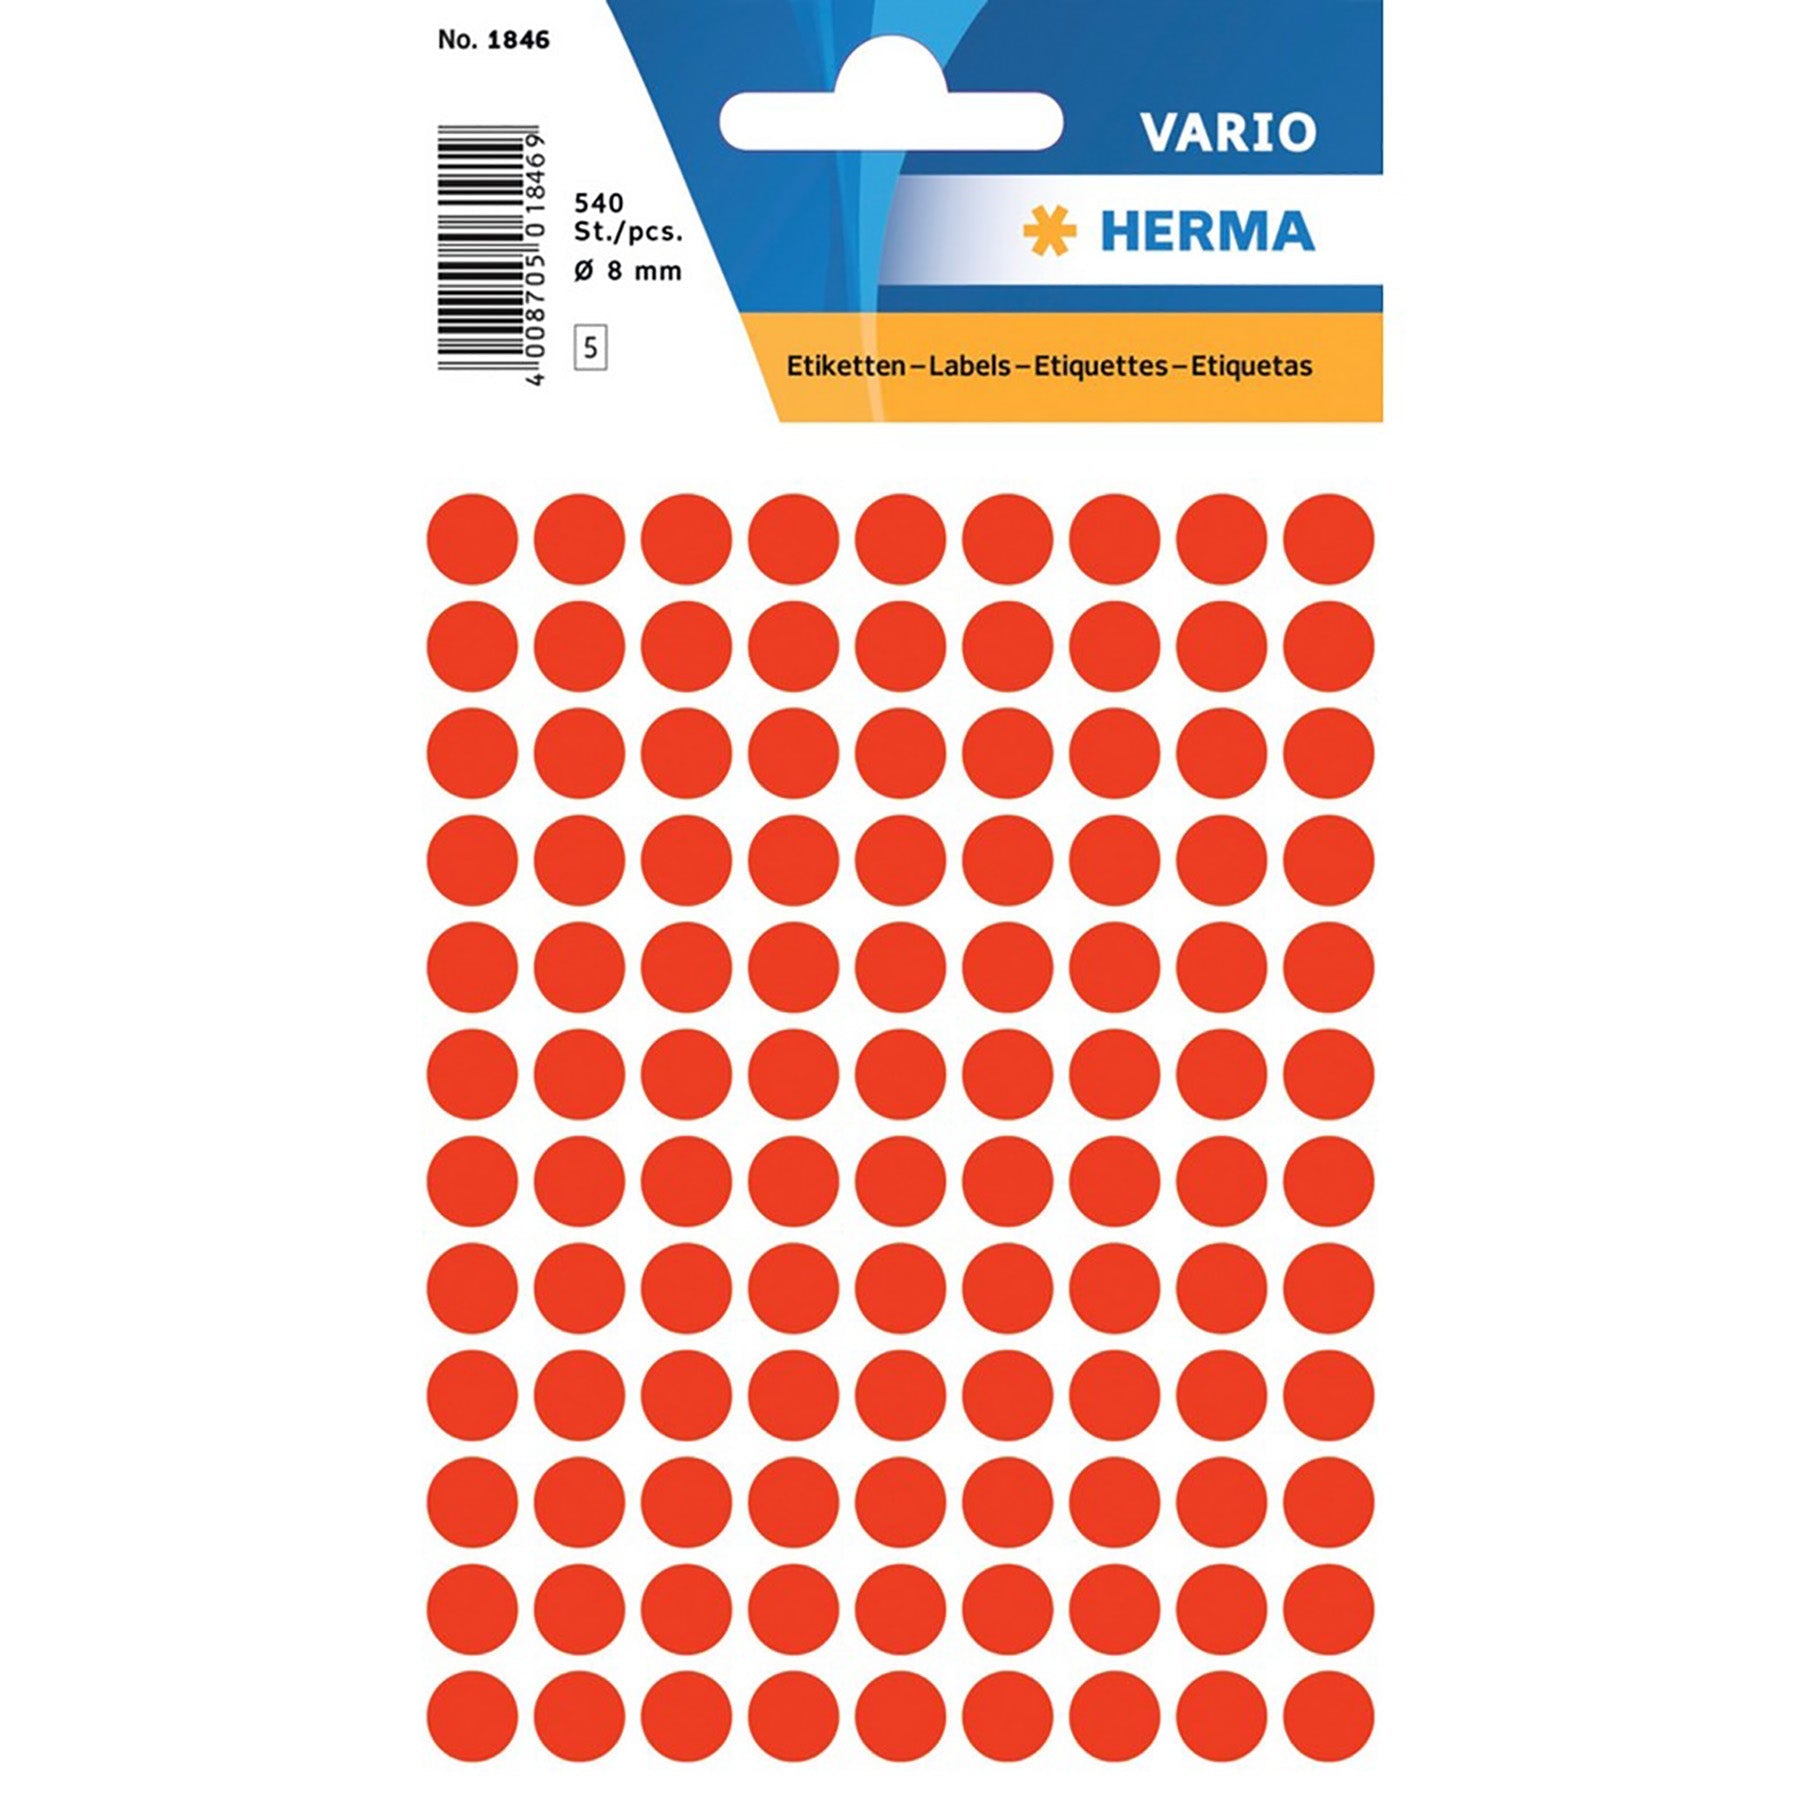 Herma Vario 5 Sheets Colour-Coding Round Labels Dots, Fluo Red 0.31in